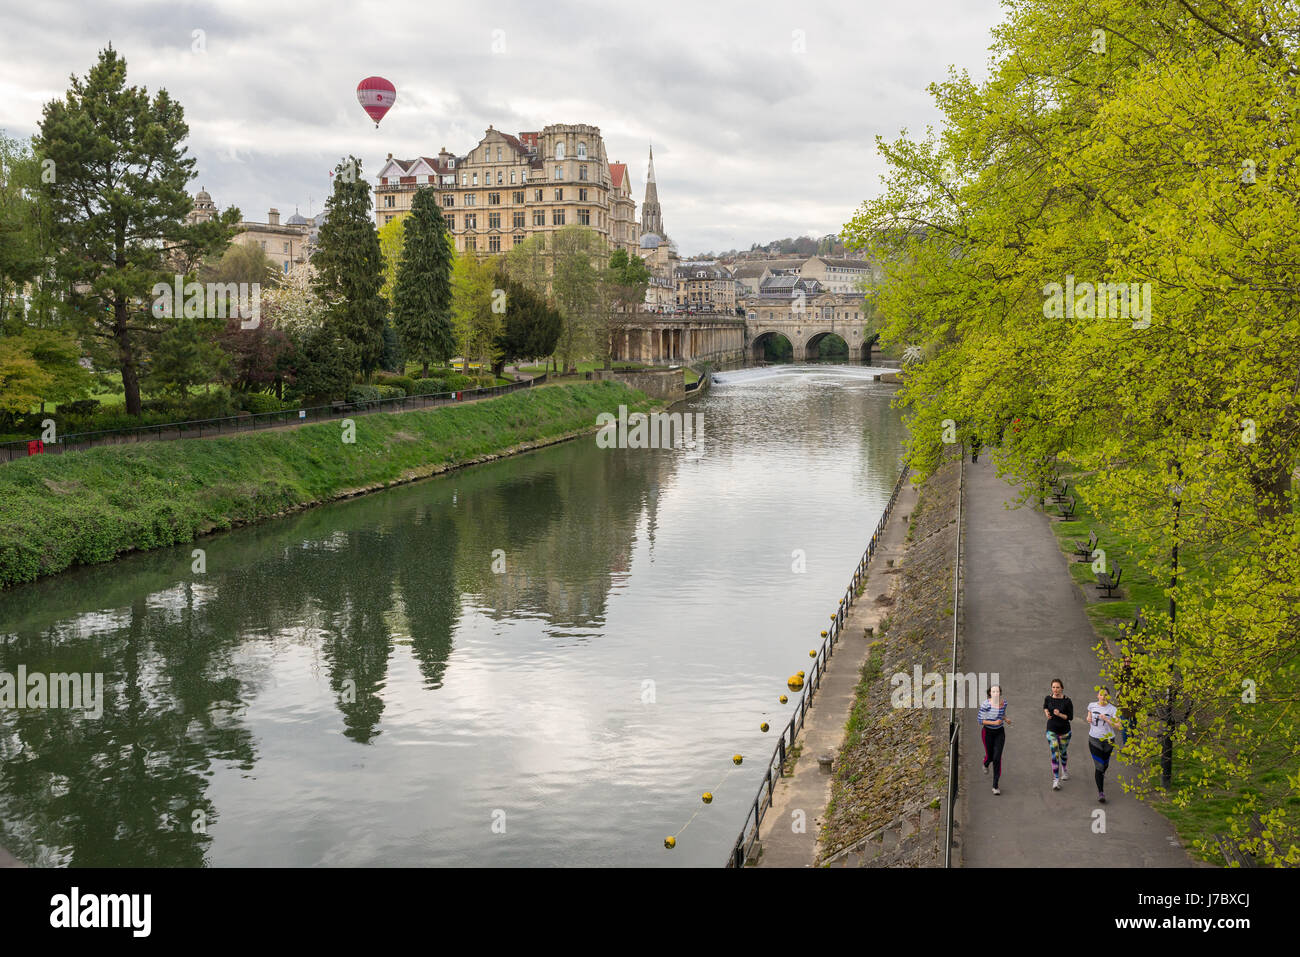 Bath, England - April 2017: Pulteney Bridge crossing the River Avon in Bath, England, UK. Three women running on the footpath along the riverside and  Stock Photo